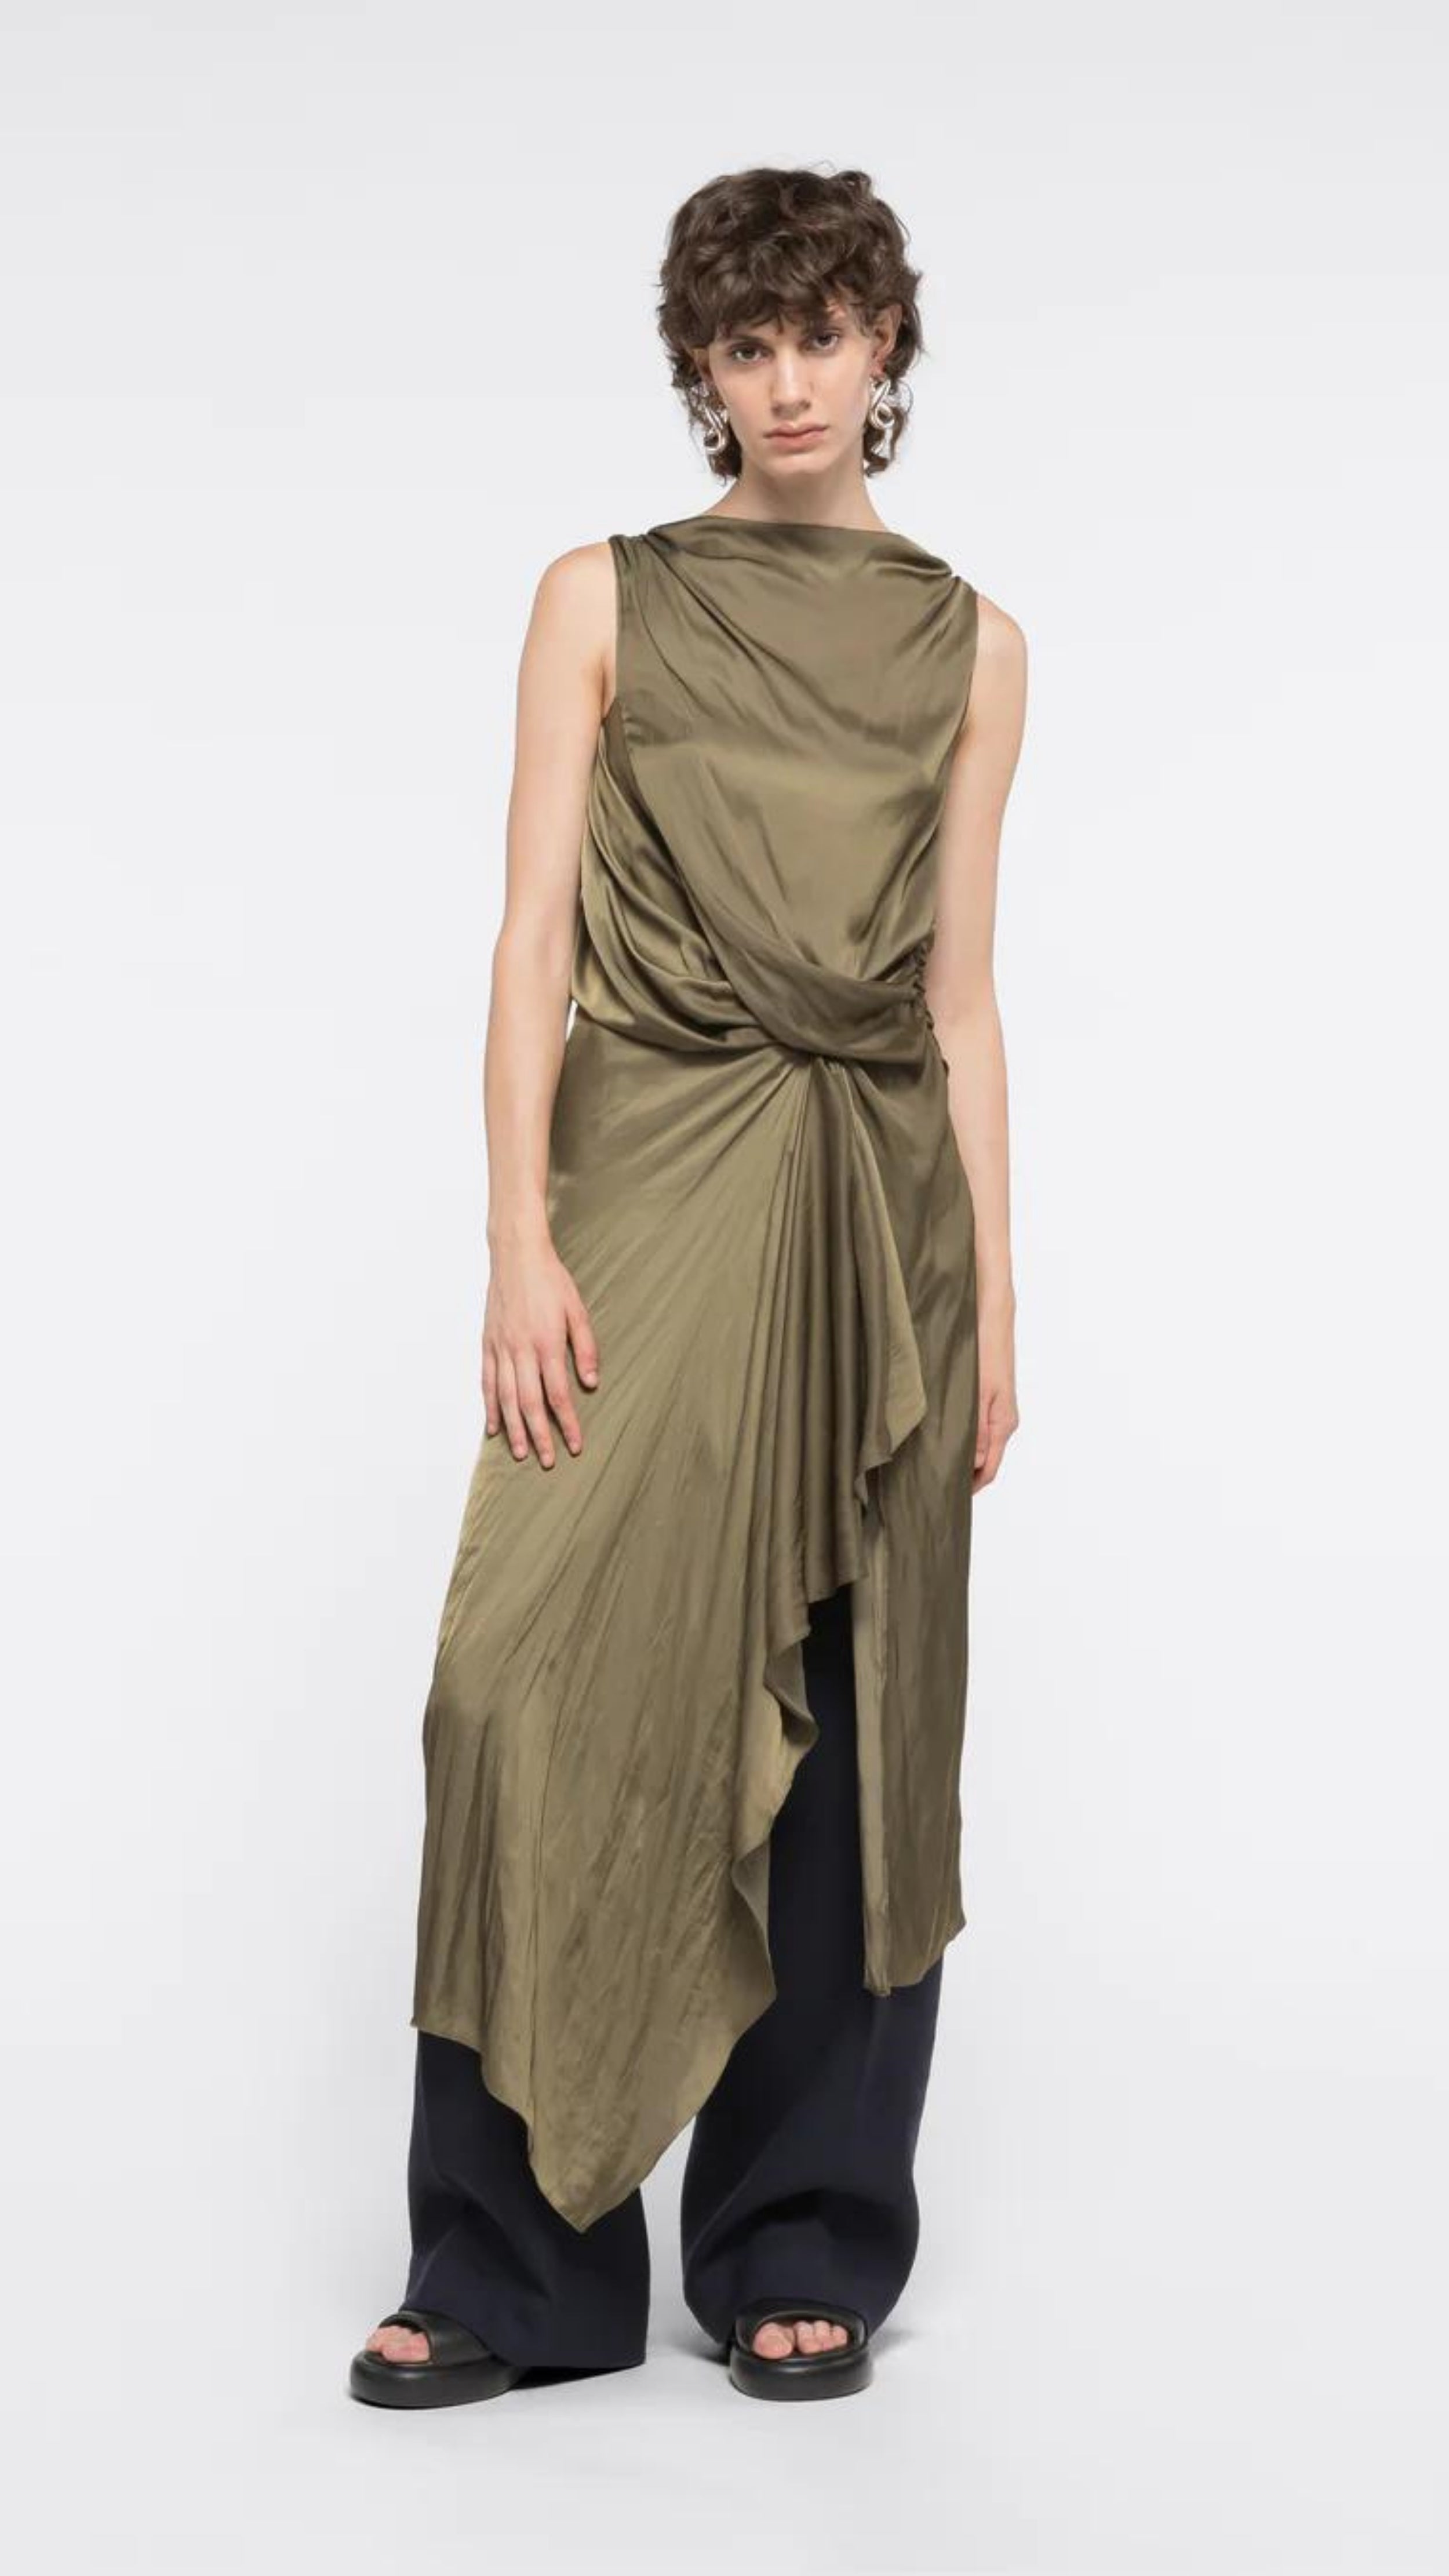 AZ Factory Colville Molly Molloy Lucinda Chambers, Sleeveless Draped Dress in Khaki An elegant olive green formal dress with a silhouette defined by a straight neckline and asymmetrical hemline. The waistline has detailed draping and the front leg as a slit. Shown on model facing front.